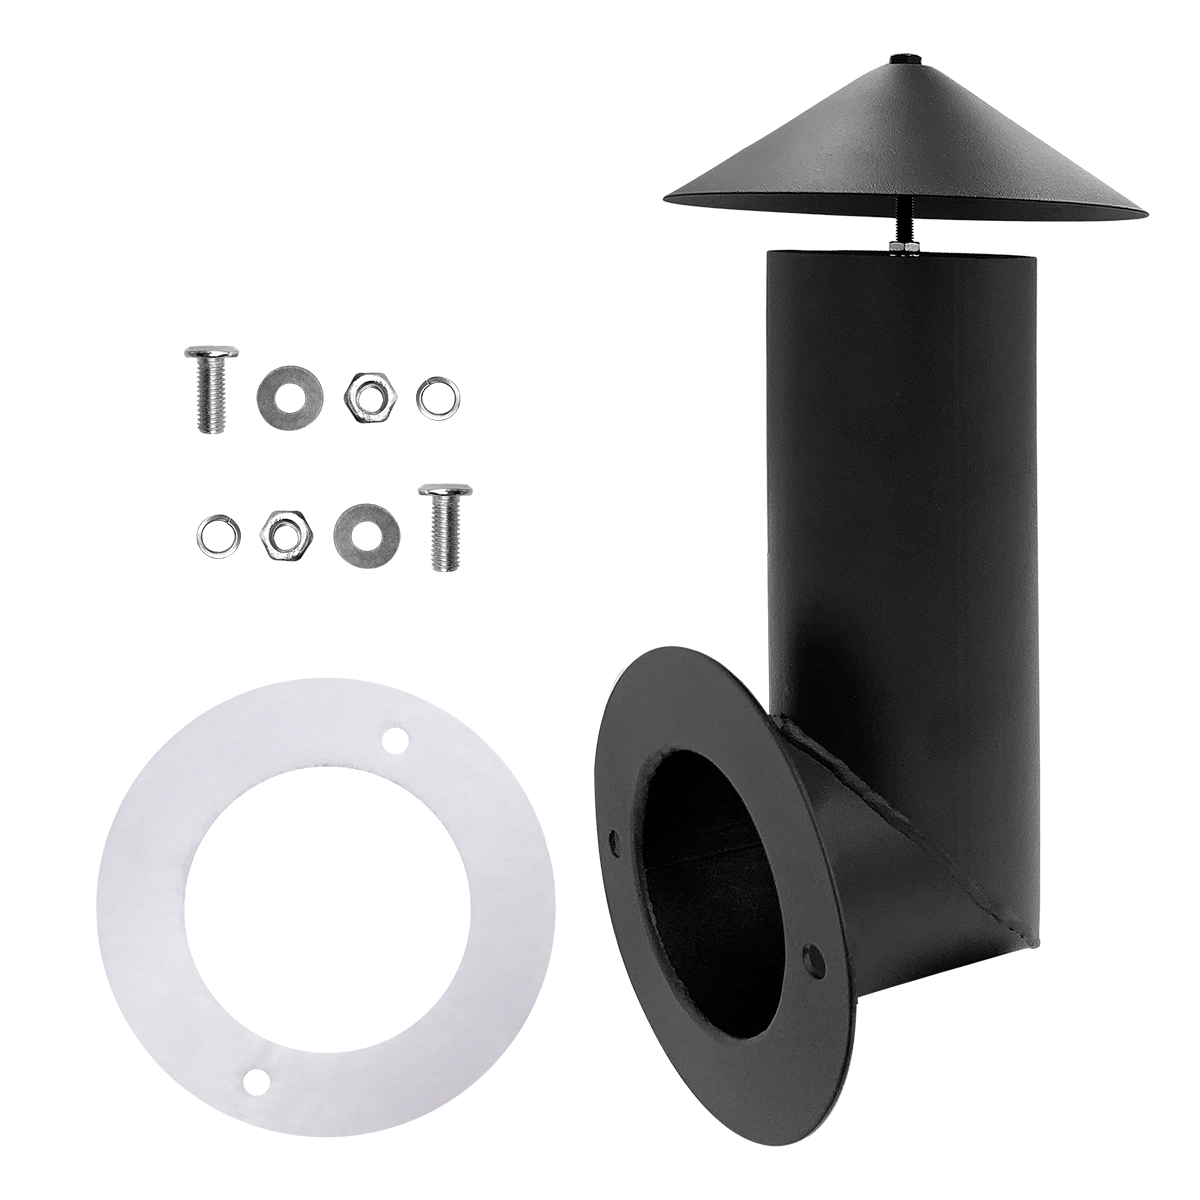 Chimney Flue Pipe and Chimney Cap Kit for Traeger and DIY Grills-YAOAWE